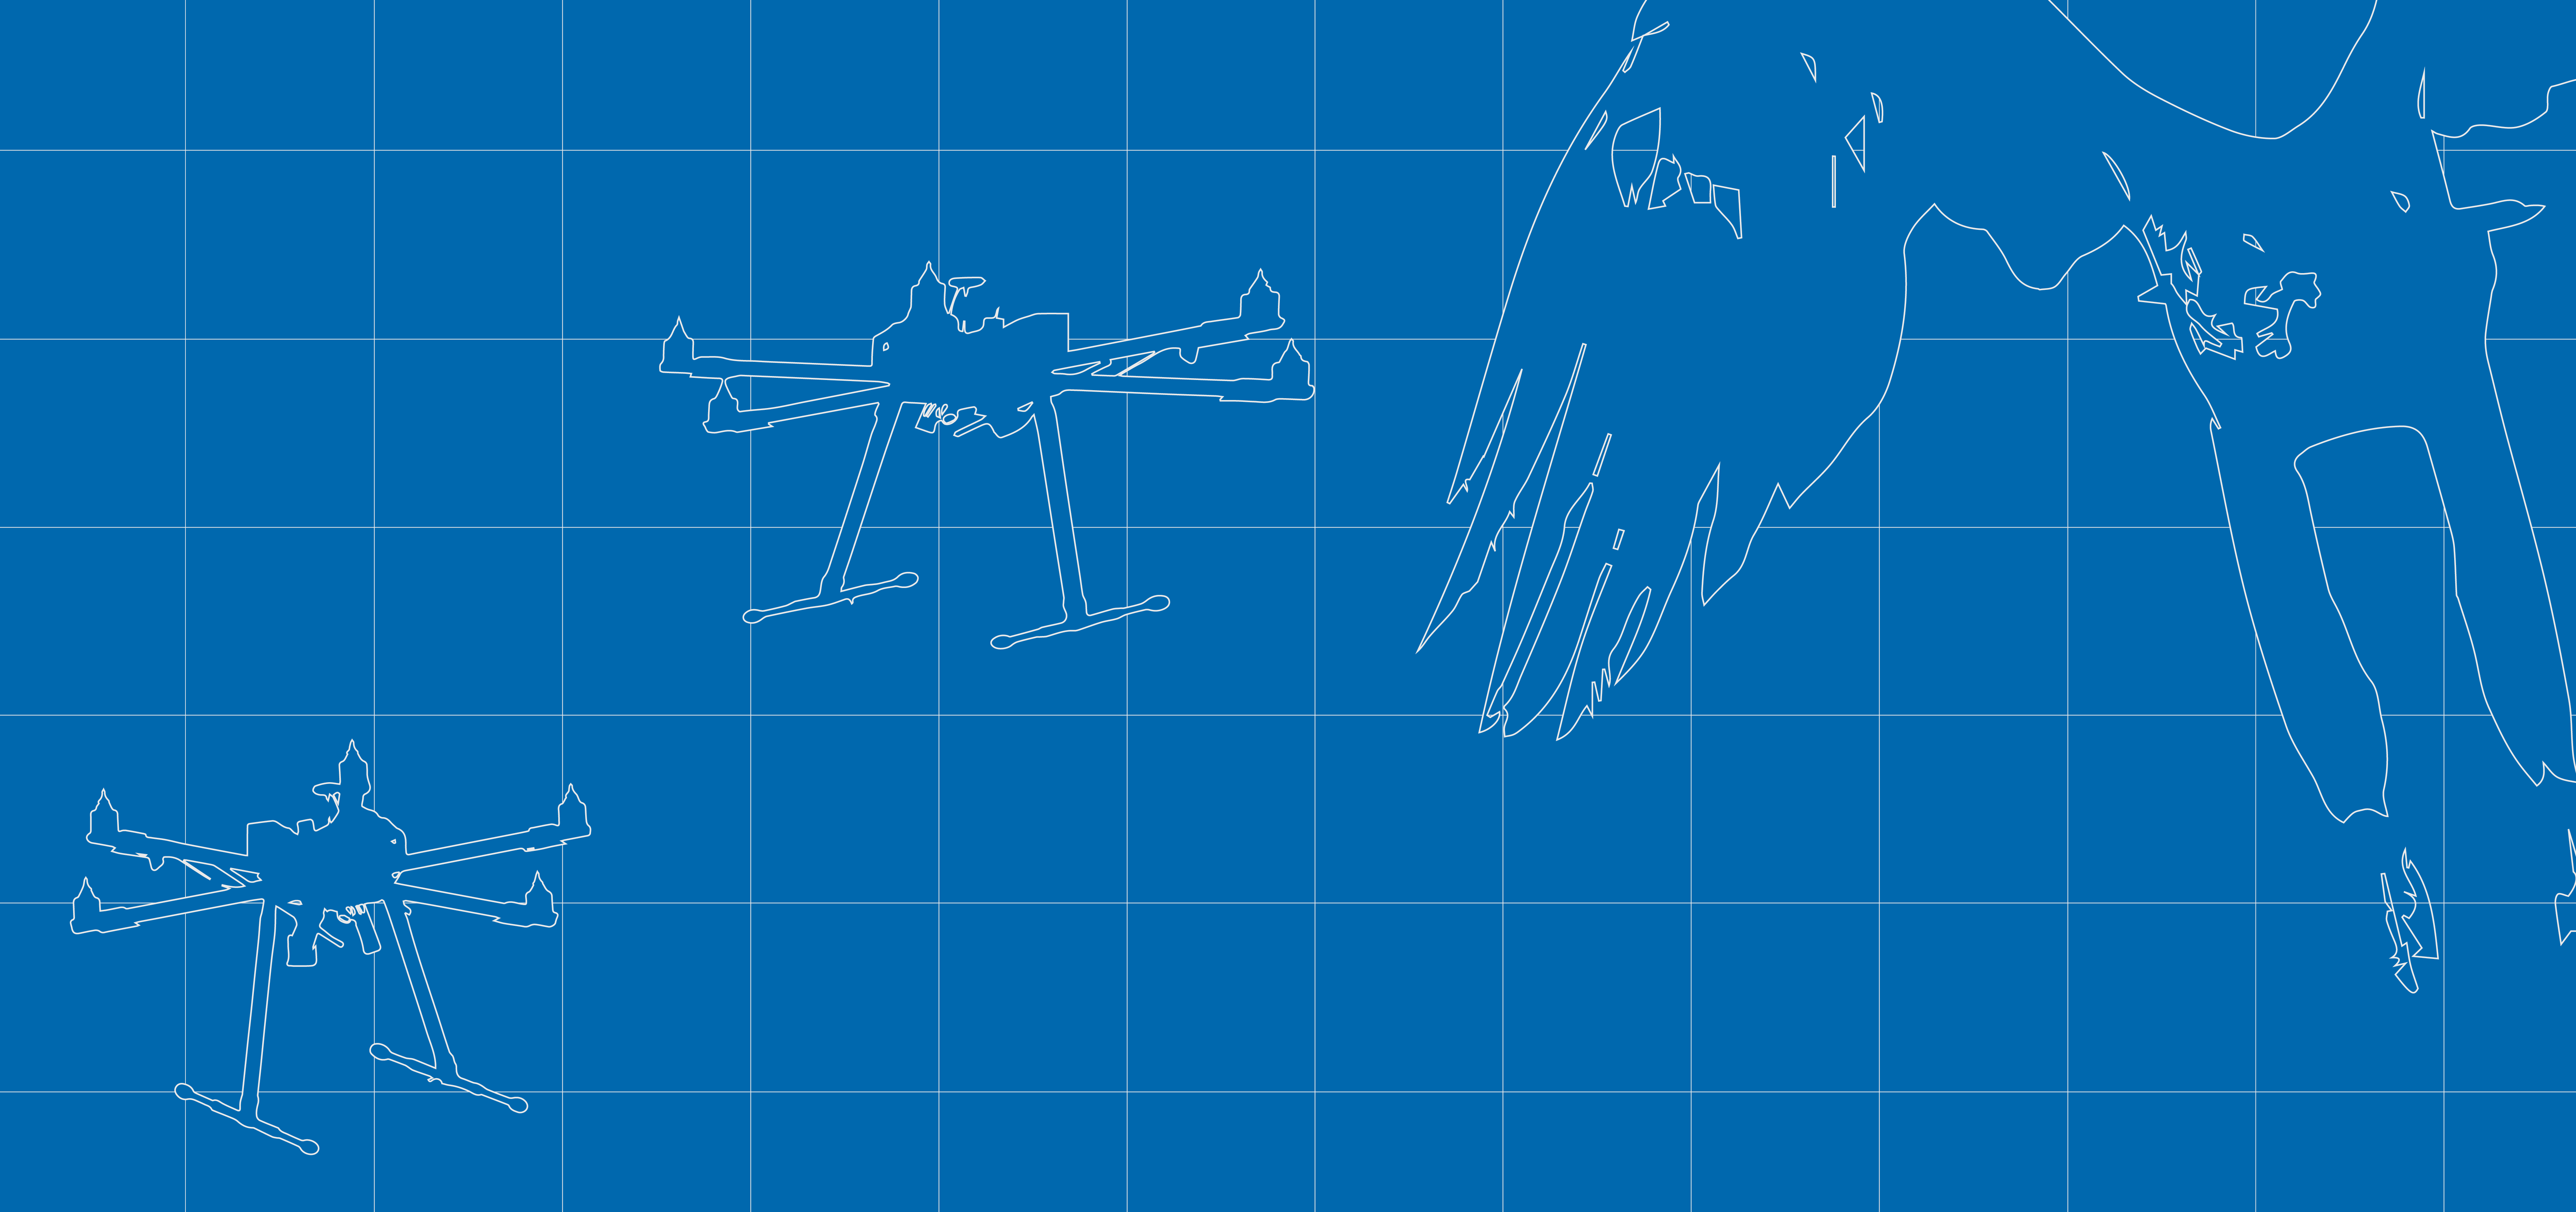 Blueprint, two drones with bird